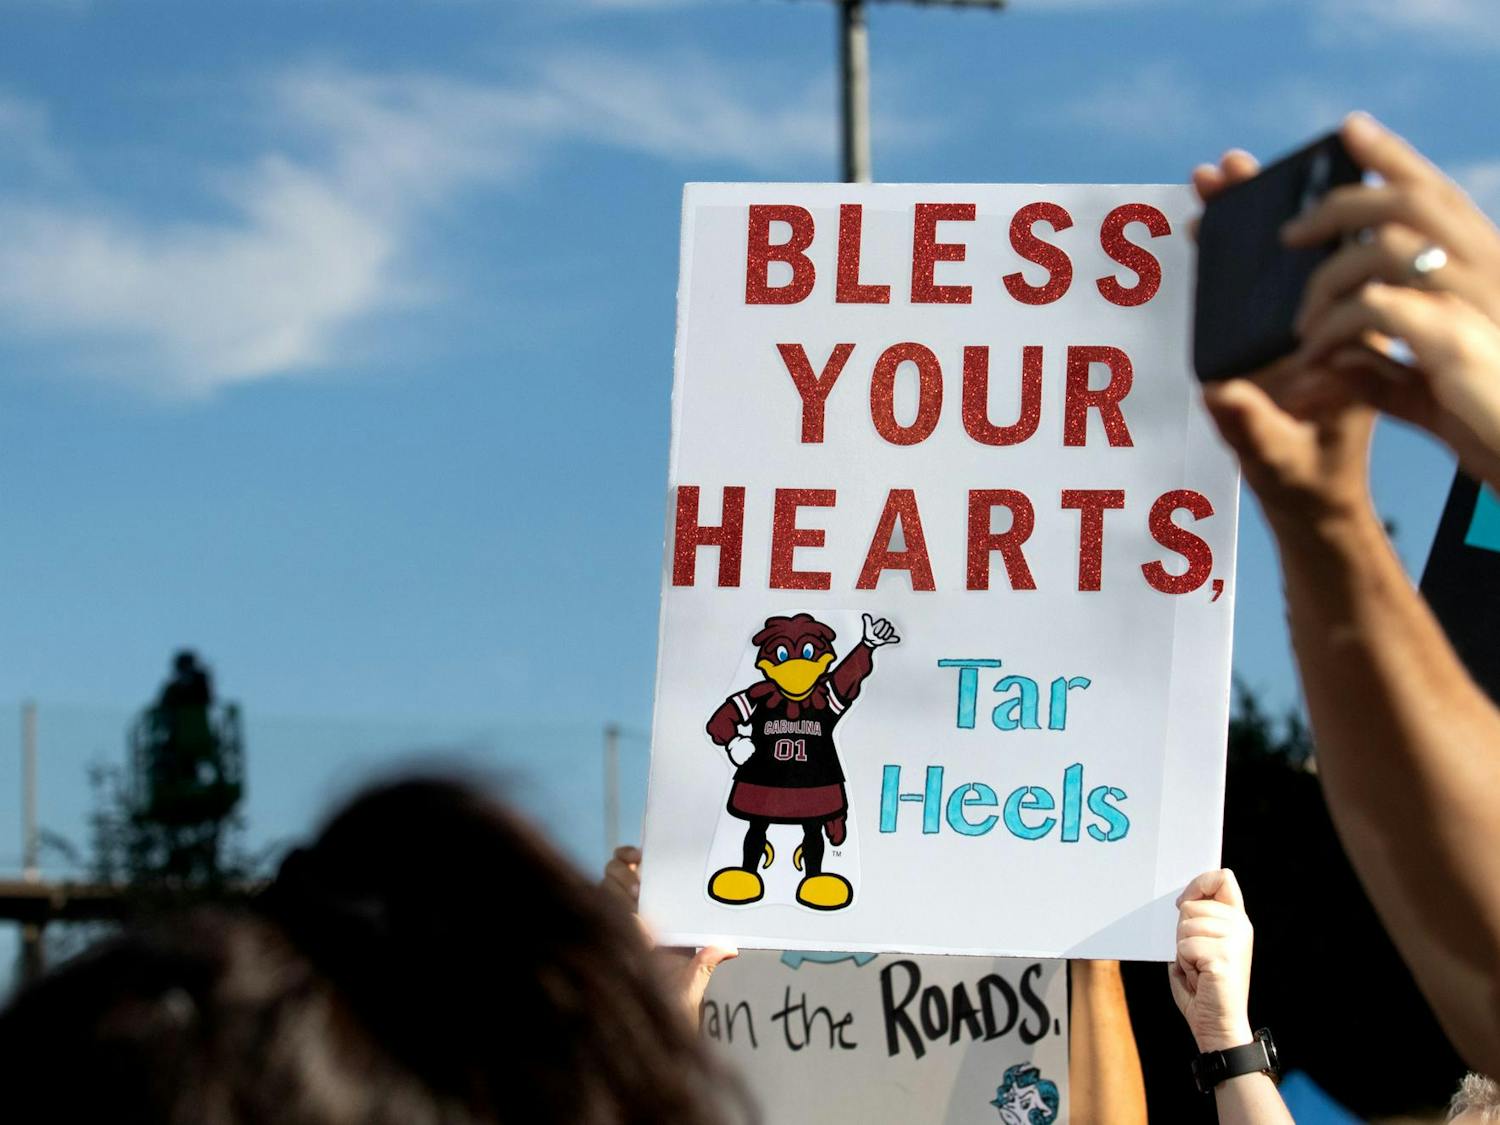 A sign saying “Bless your hearts, Tar Heels” is held by a South Carolina fan in Charlotte on Sept. 2, 2023. Fans gathered in Charlotte before the football game between South Carolina and North Carolina.